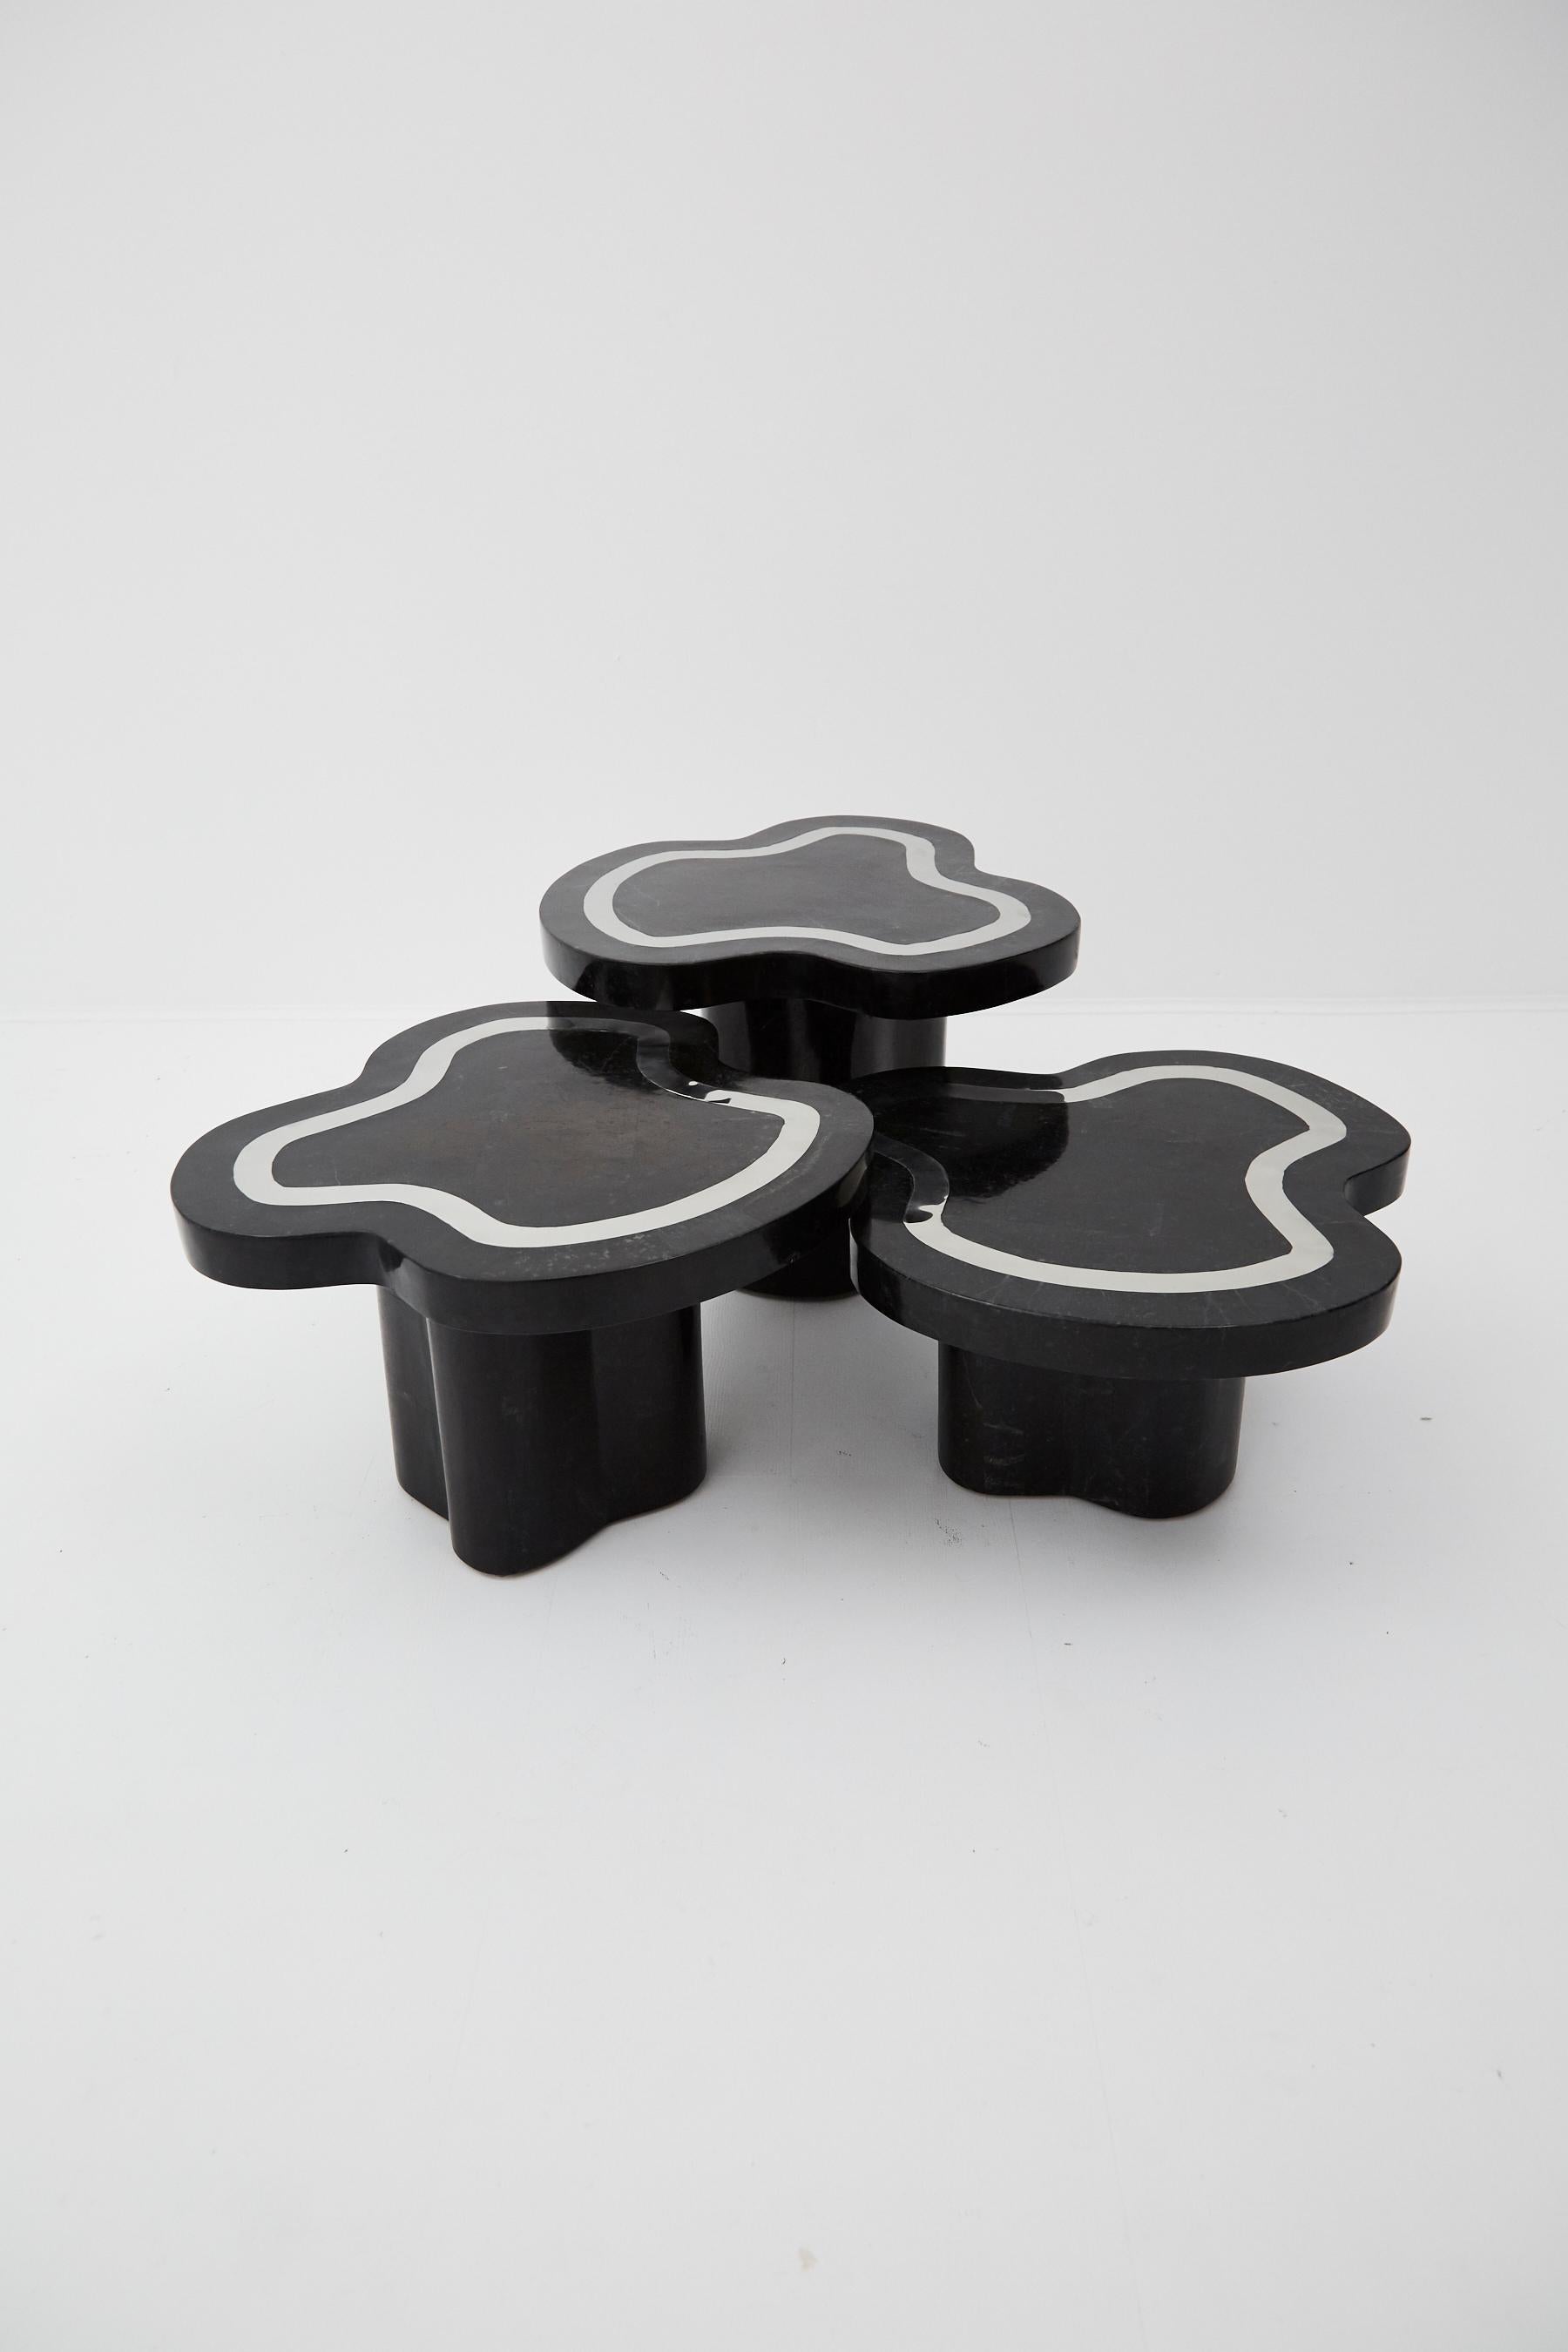 Water Mushroom Tables, Black Stone with Stainless Steel, Set of Three, 1990s For Sale 2